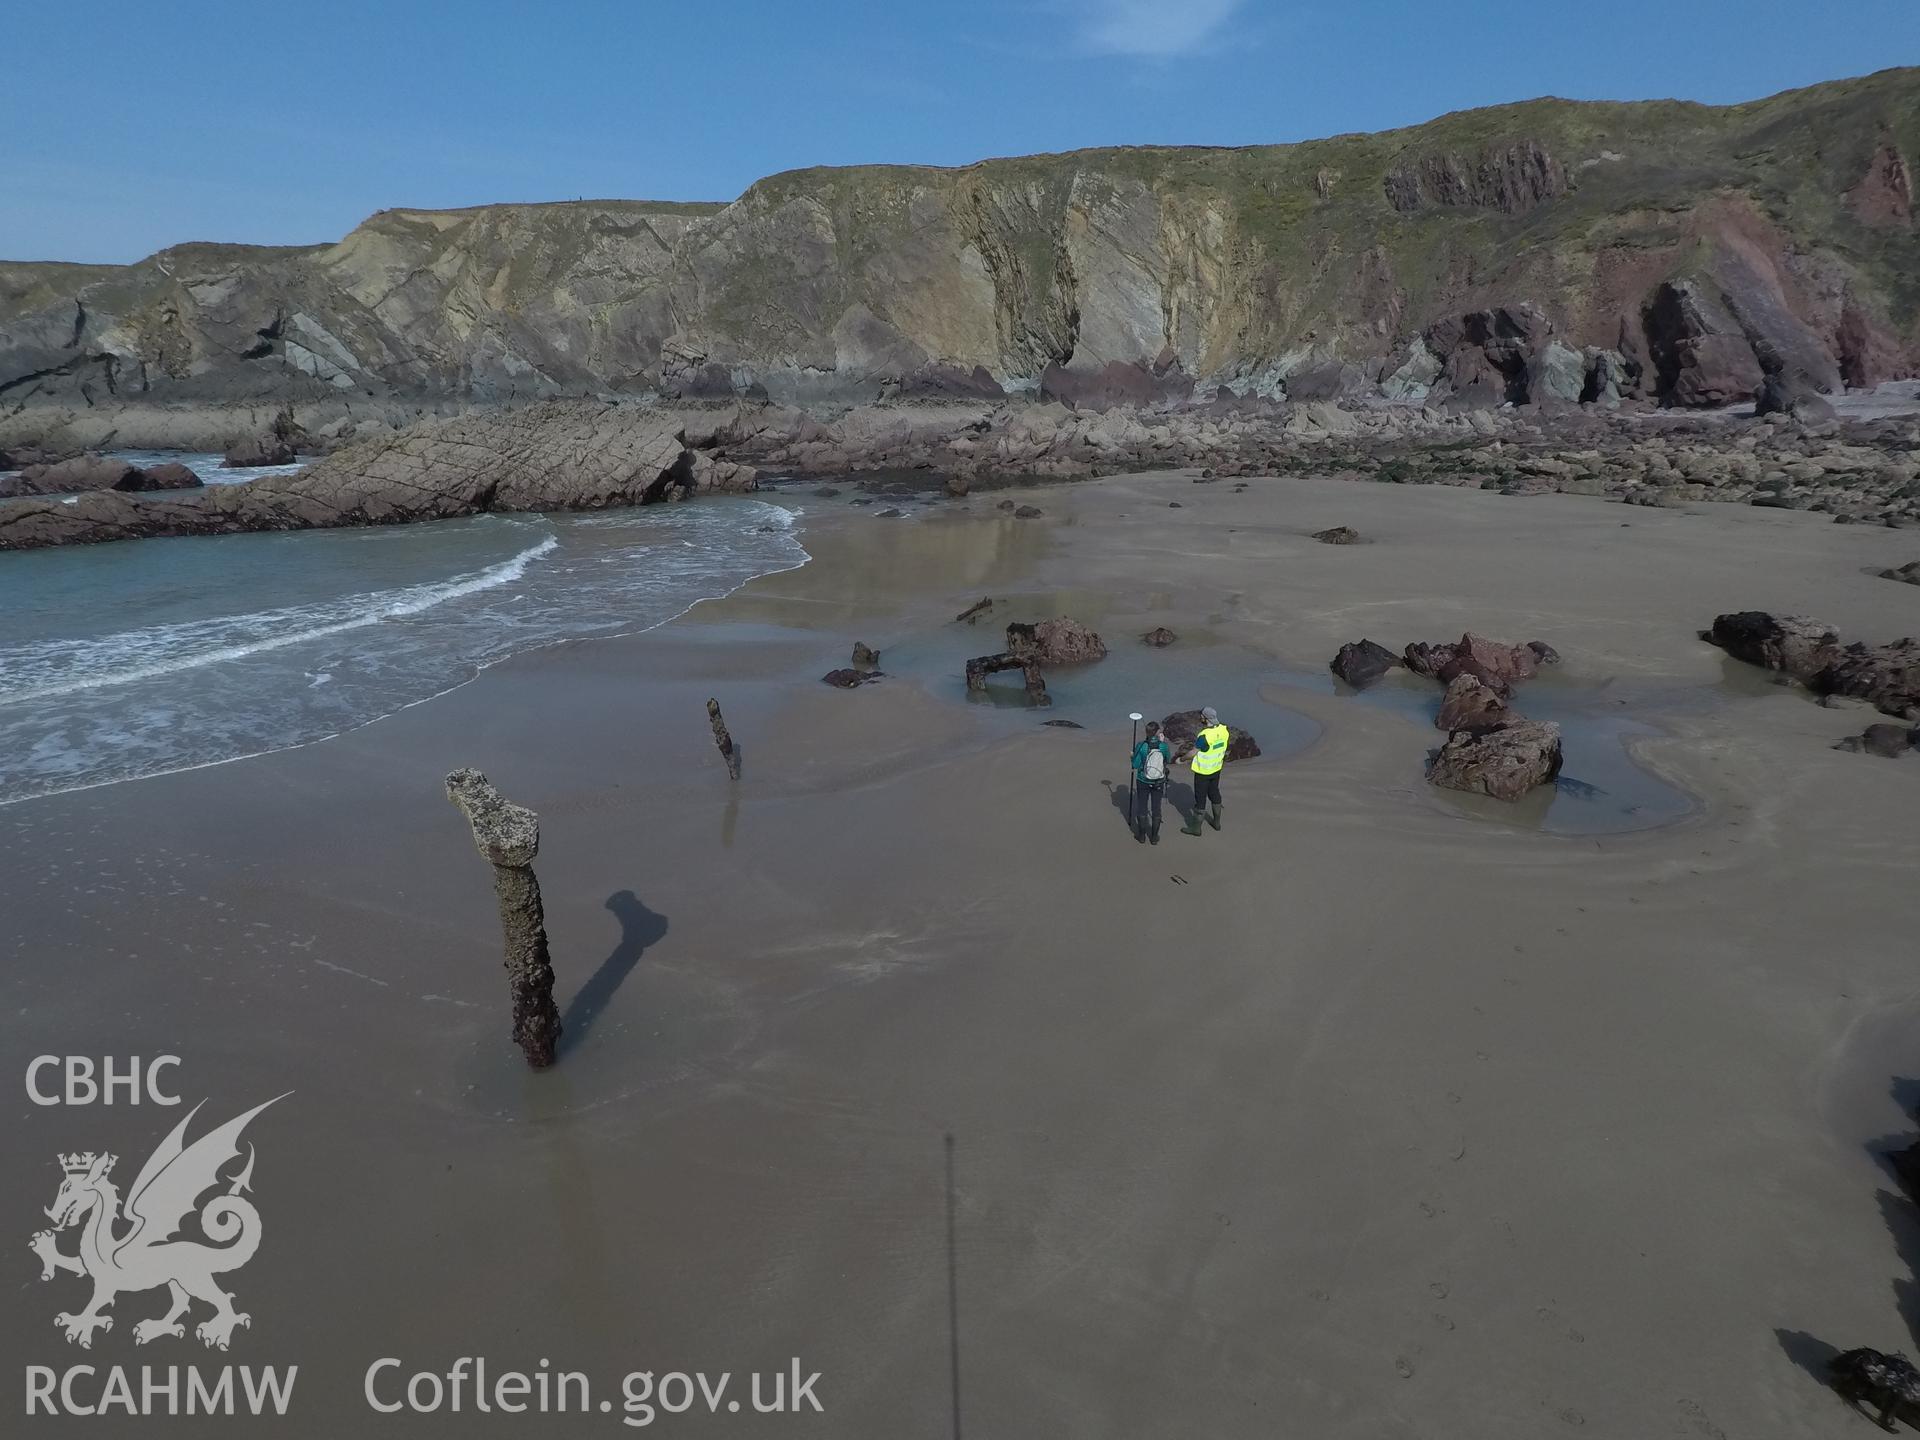 Pole camera shot of CHERISH team surveying the Albion paddle steamer shipwreck, exposed on the beach at low tide Taken by Daniel Hunt. Produced with EU funds through the Ireland Wales Co-operation Programme 2014-2023. All material made freely available th